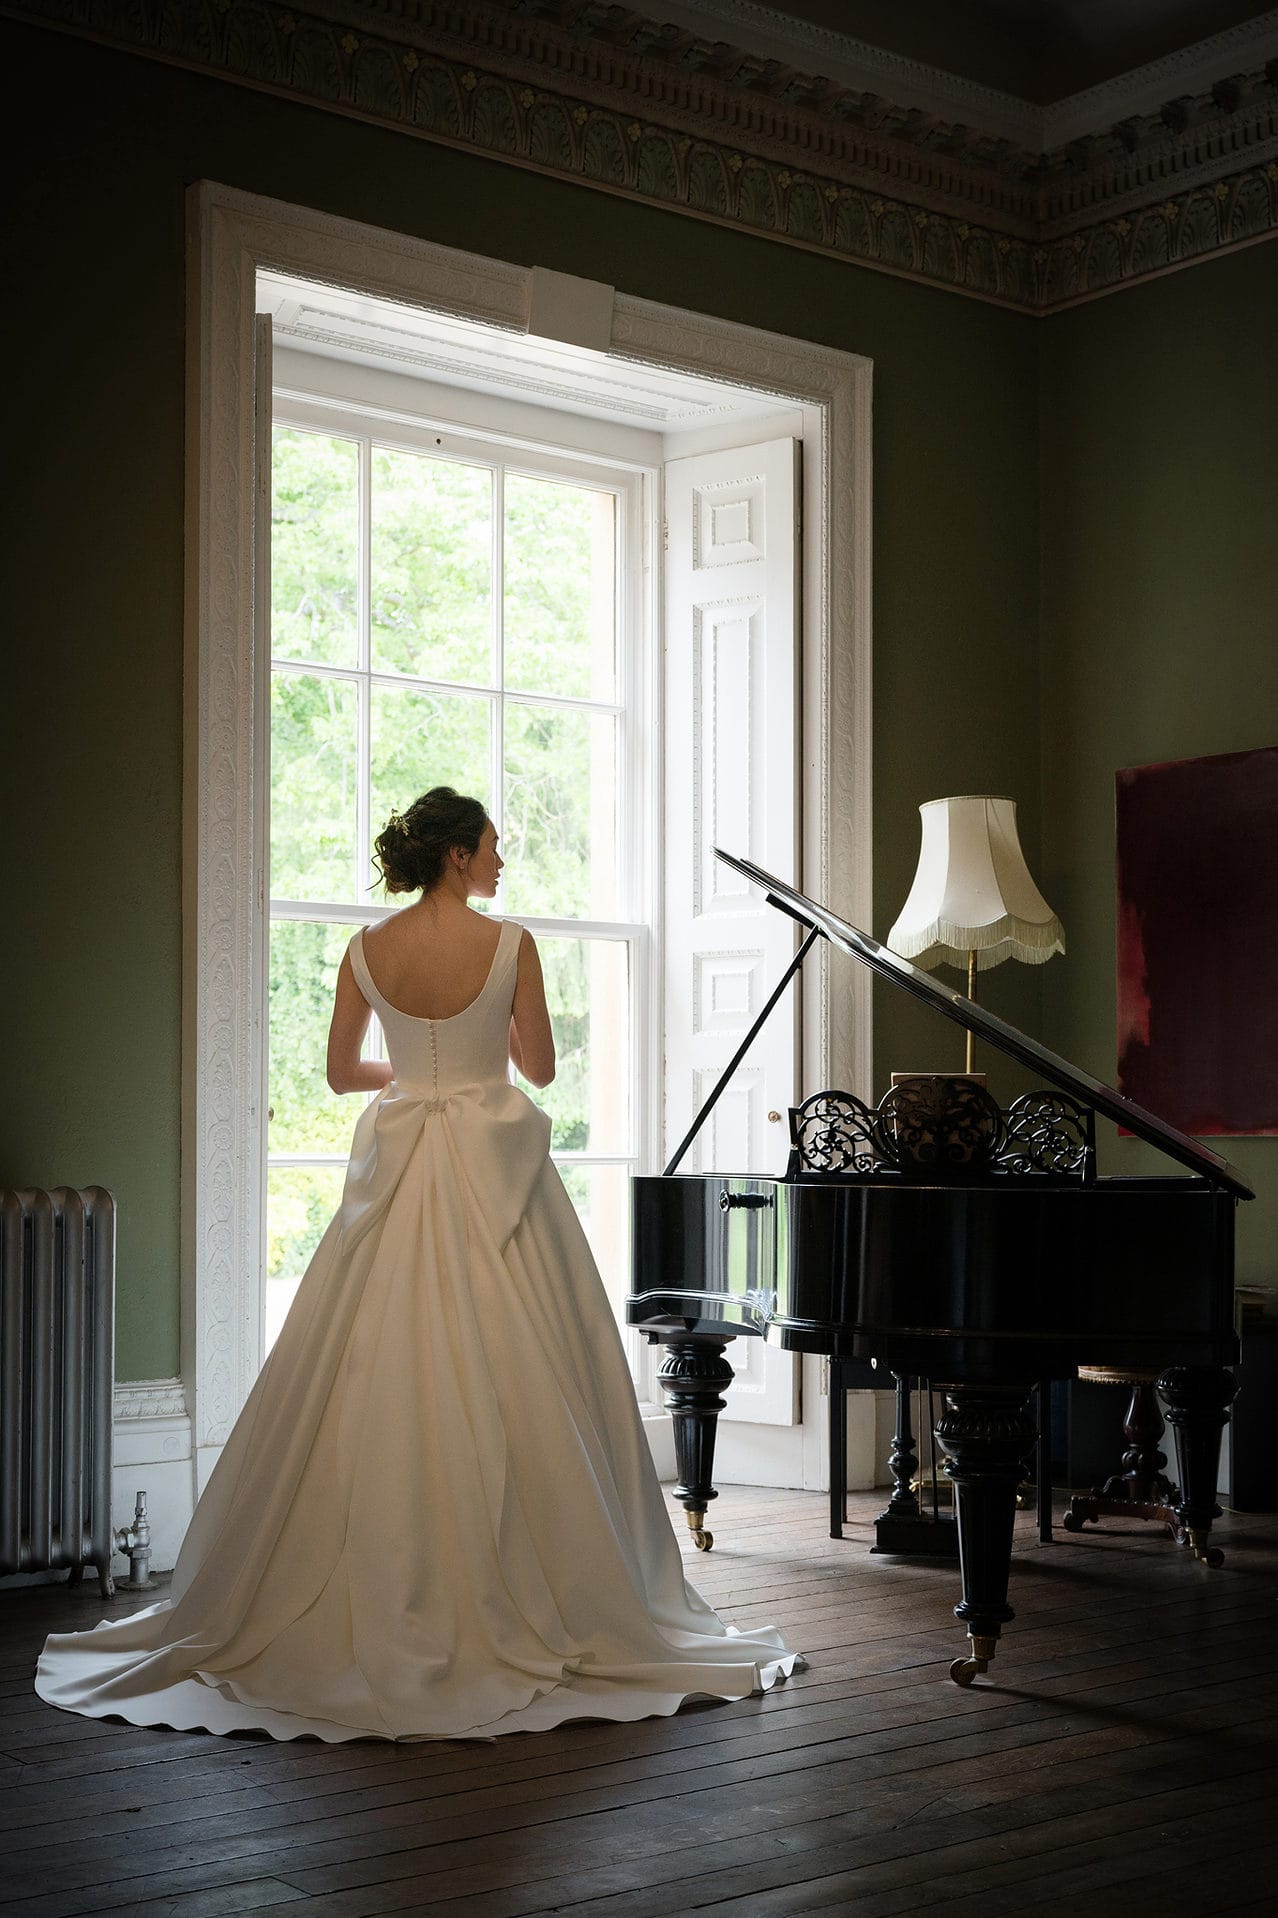 Bride standing next to a grand piano in front of a floor-to-ceiling window